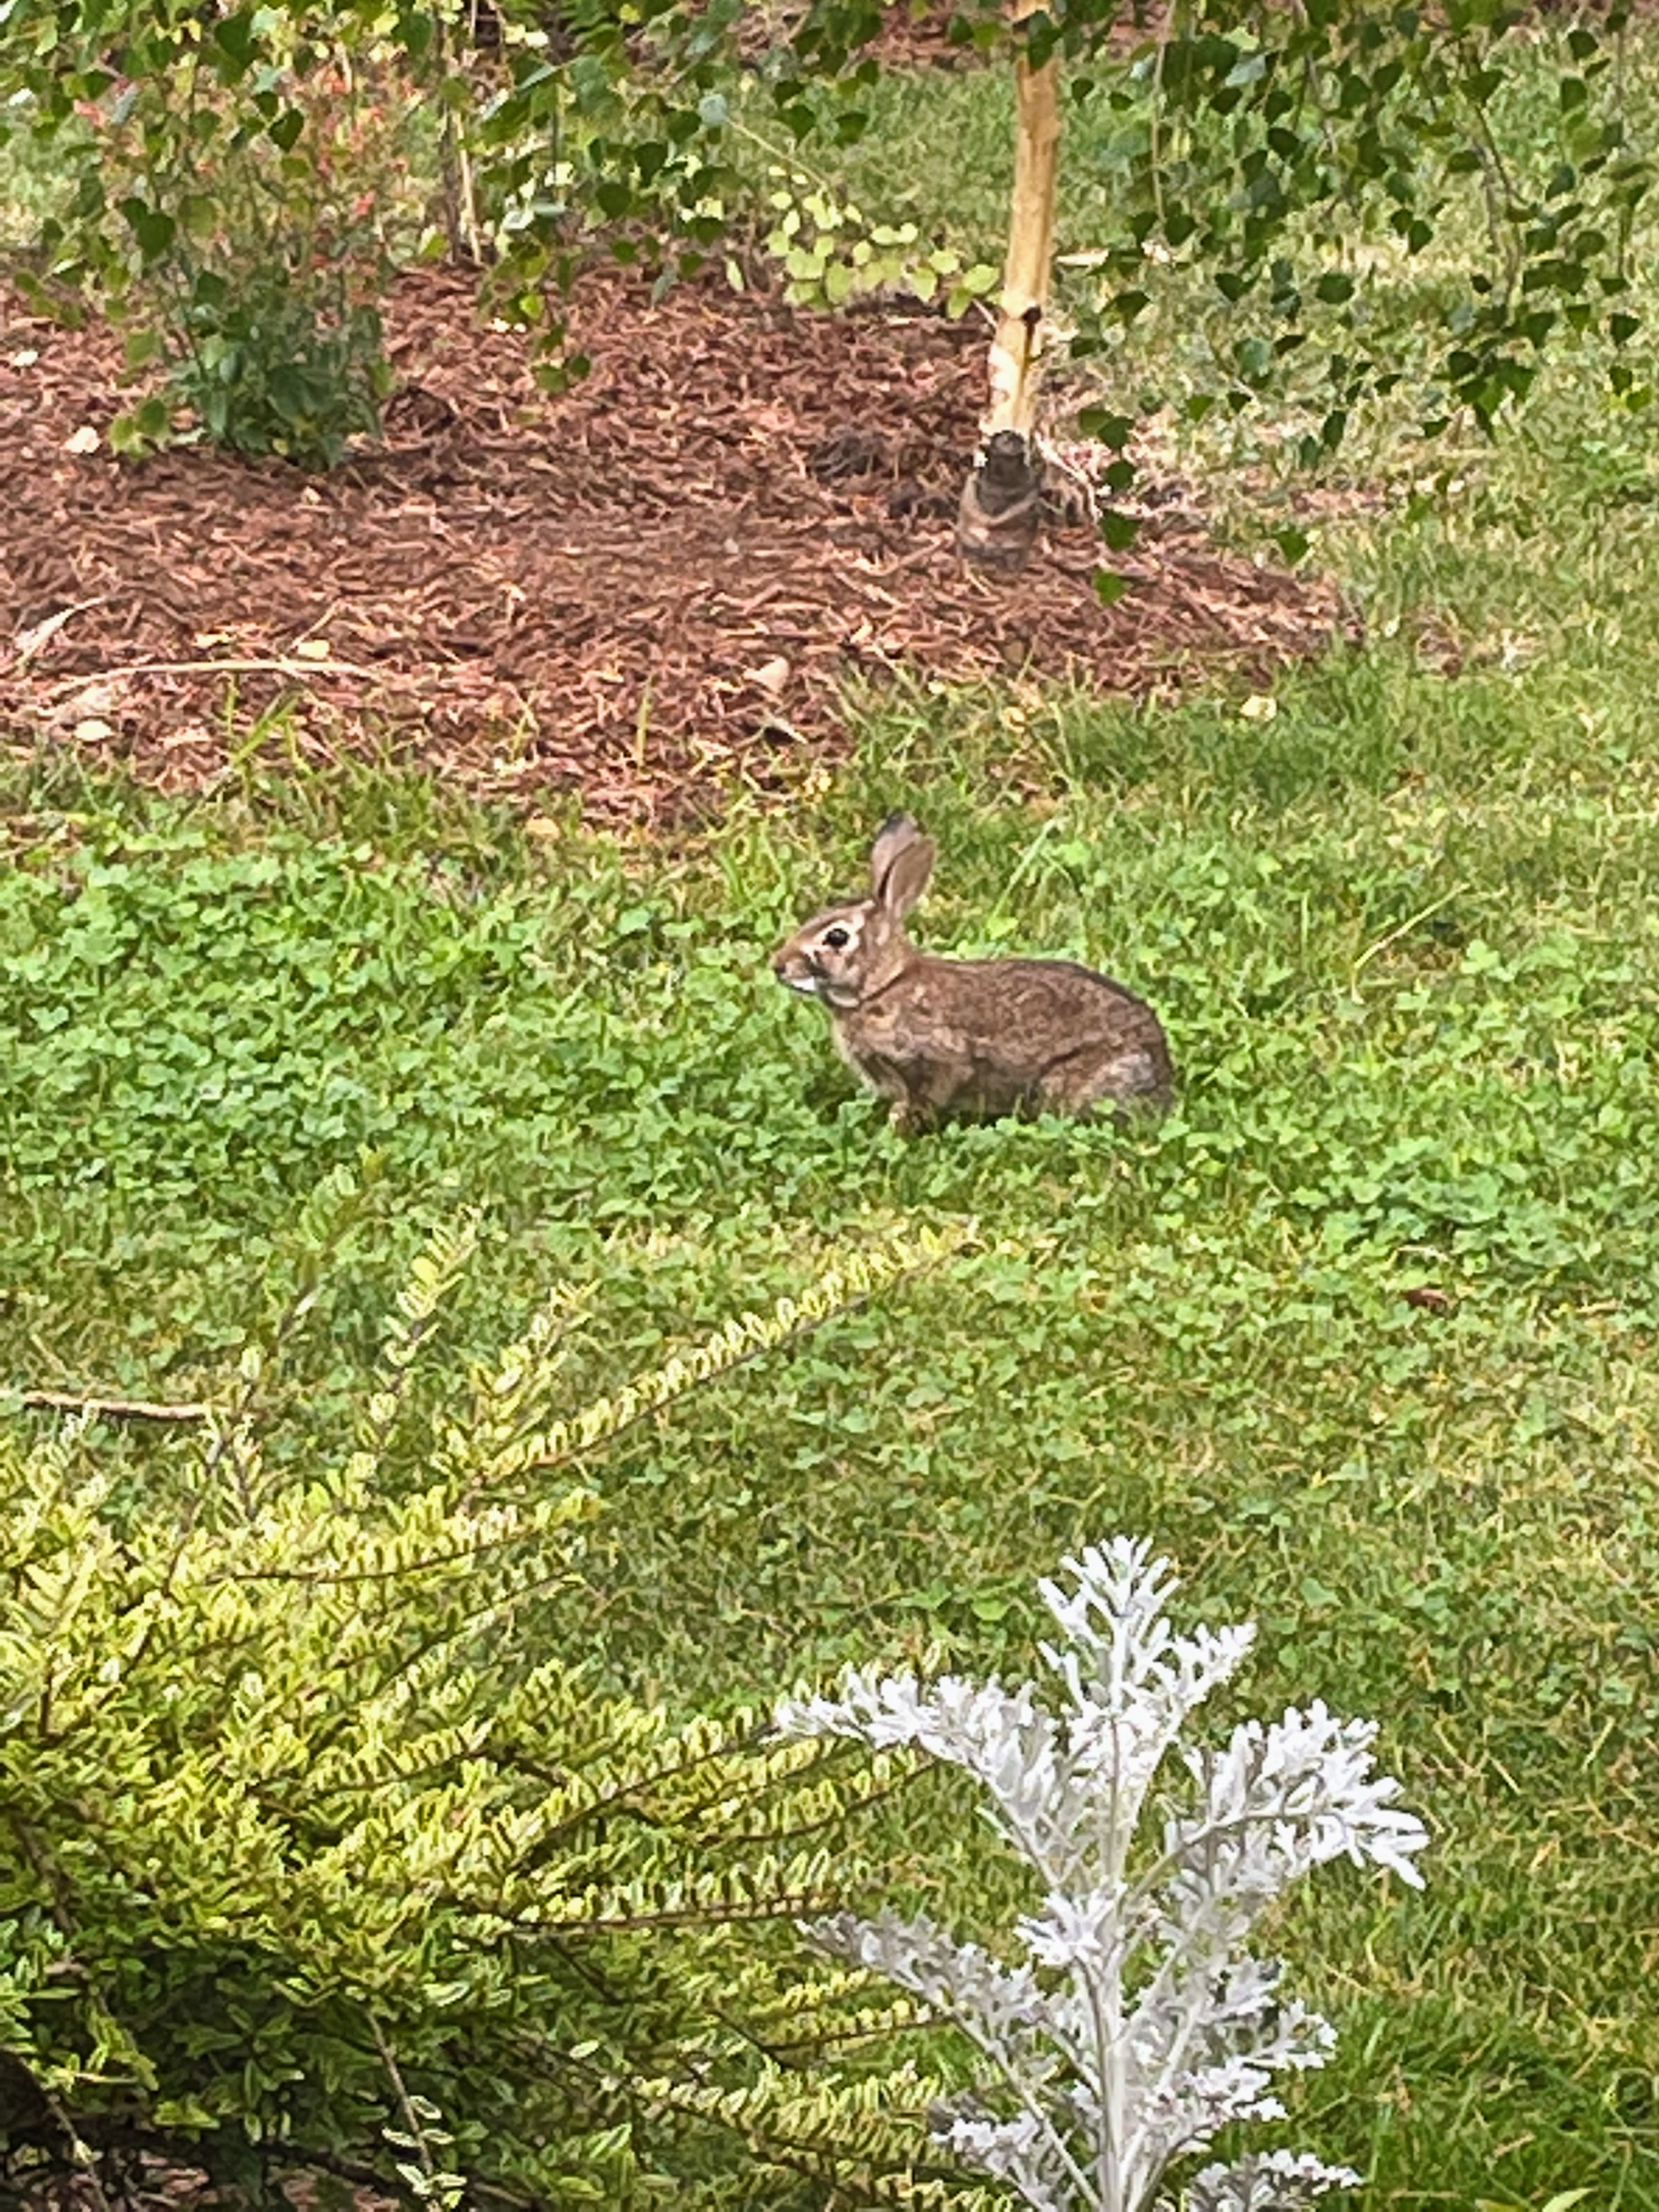 grainy photo of small rabbit in lawn of clover